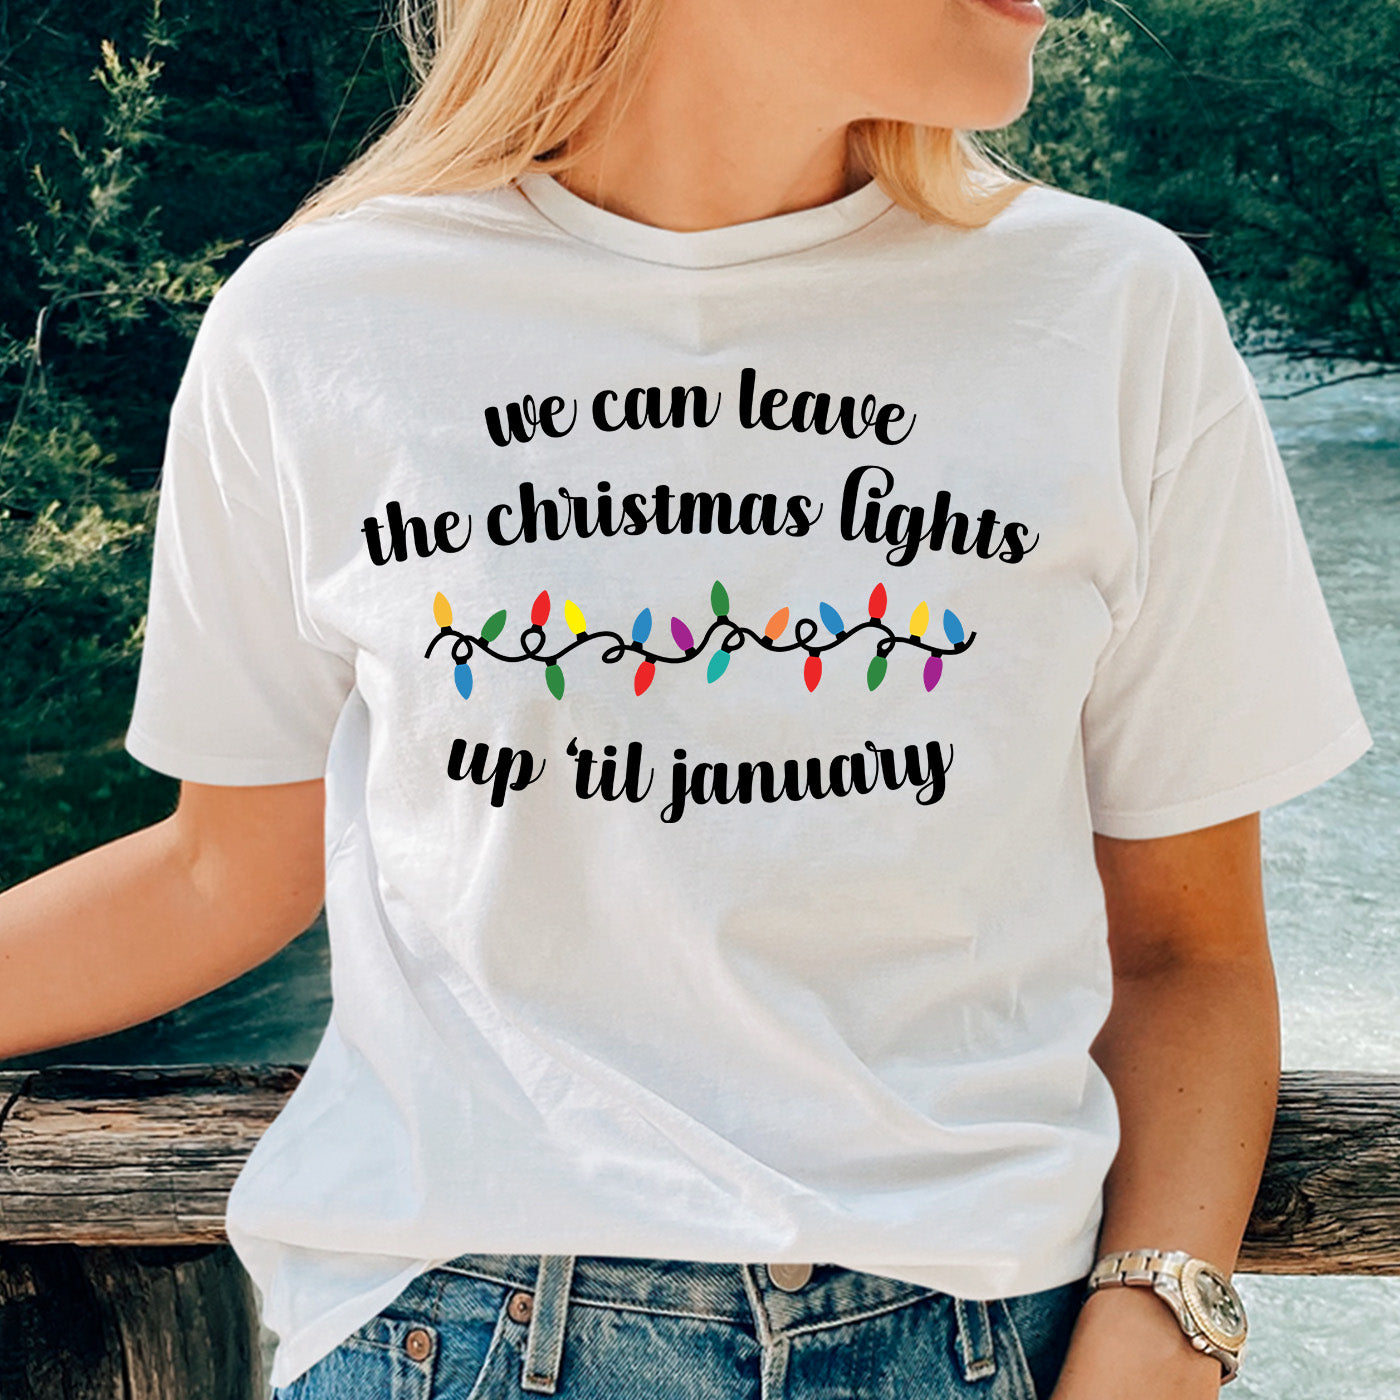 We Can Leave The Christmas Lights Up 'Til January T Shirt